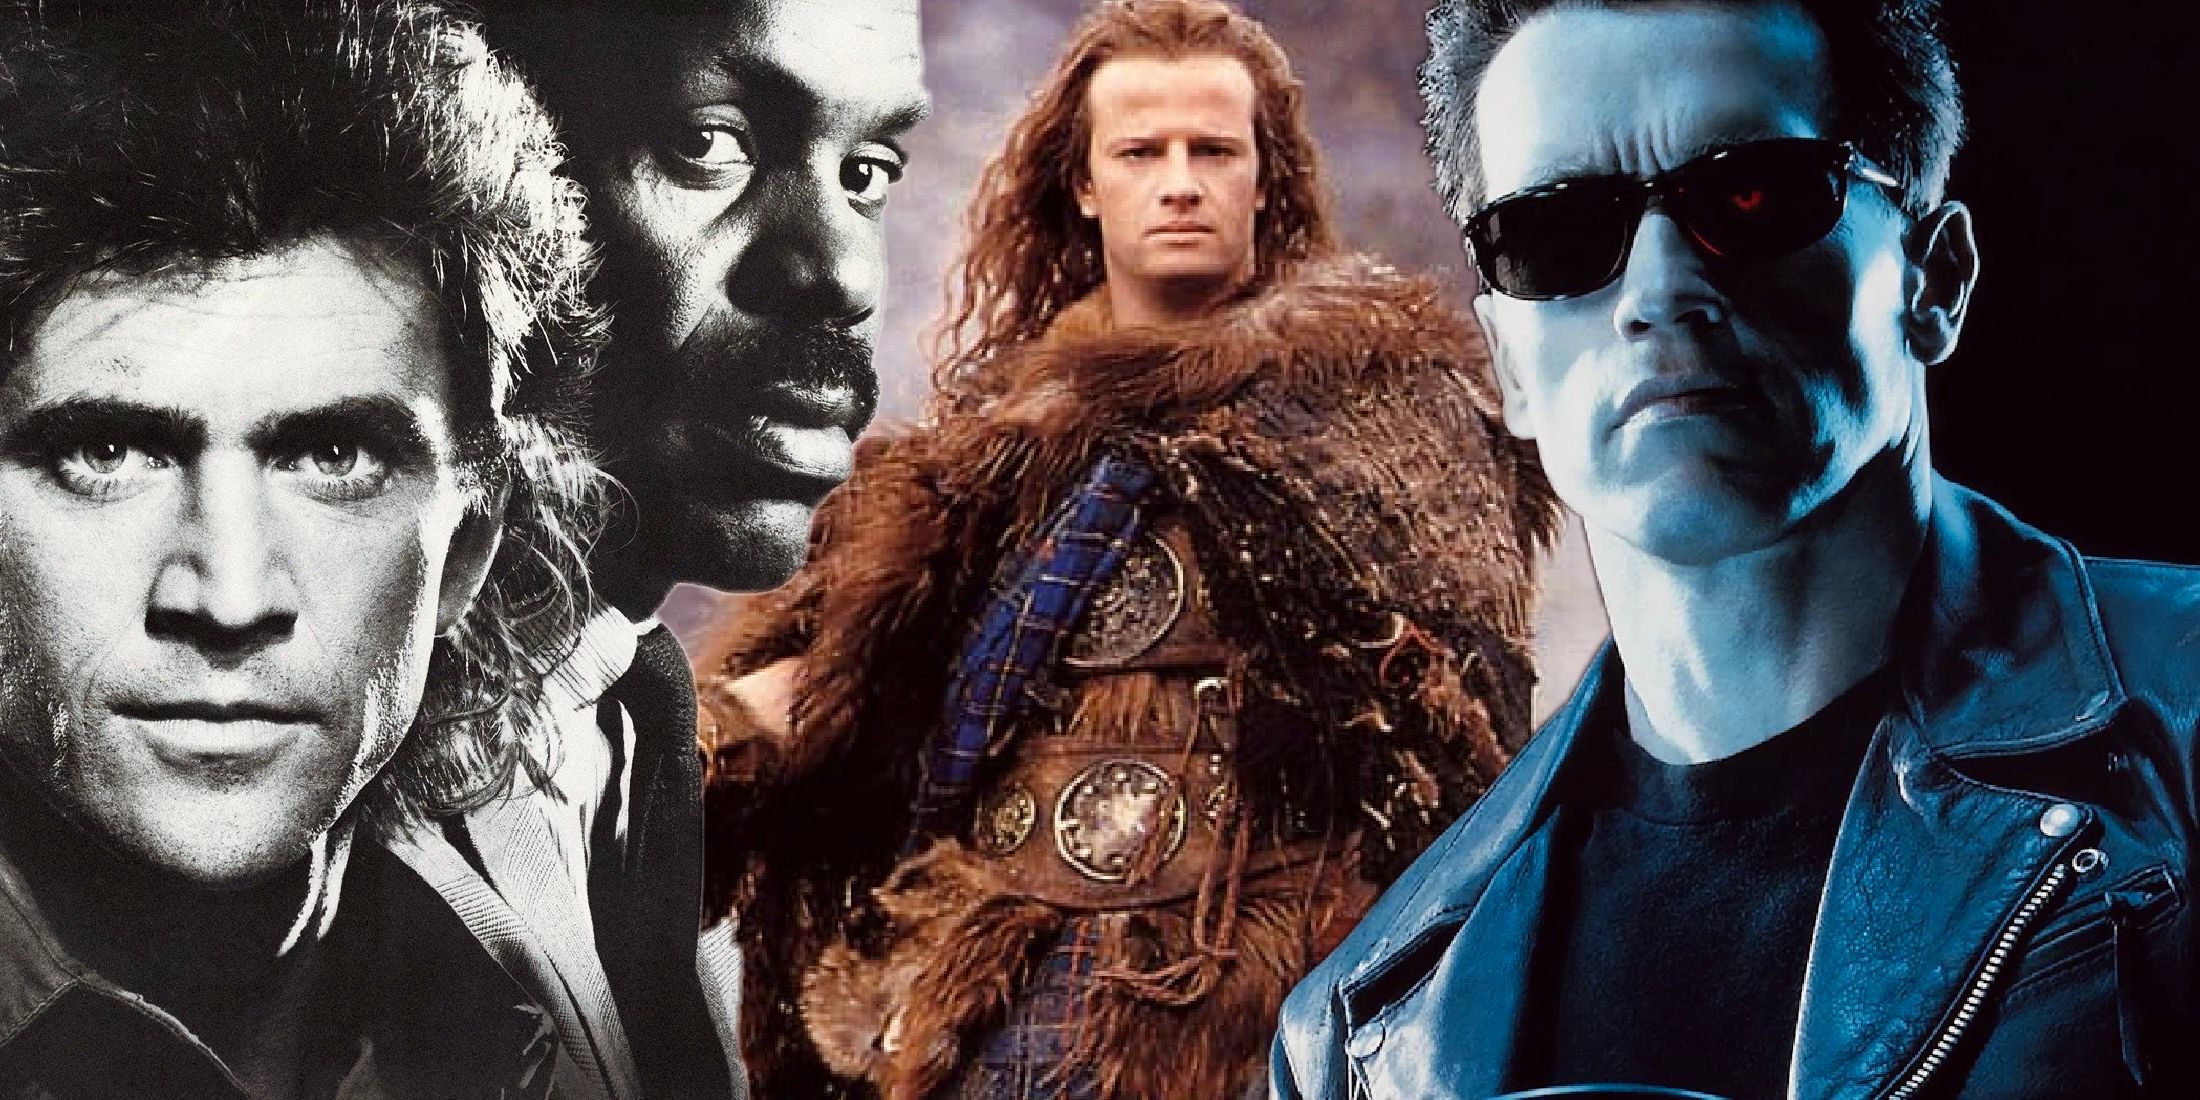 Lethal Weapon, Highlander, and The Terminator main heroes stand side by side